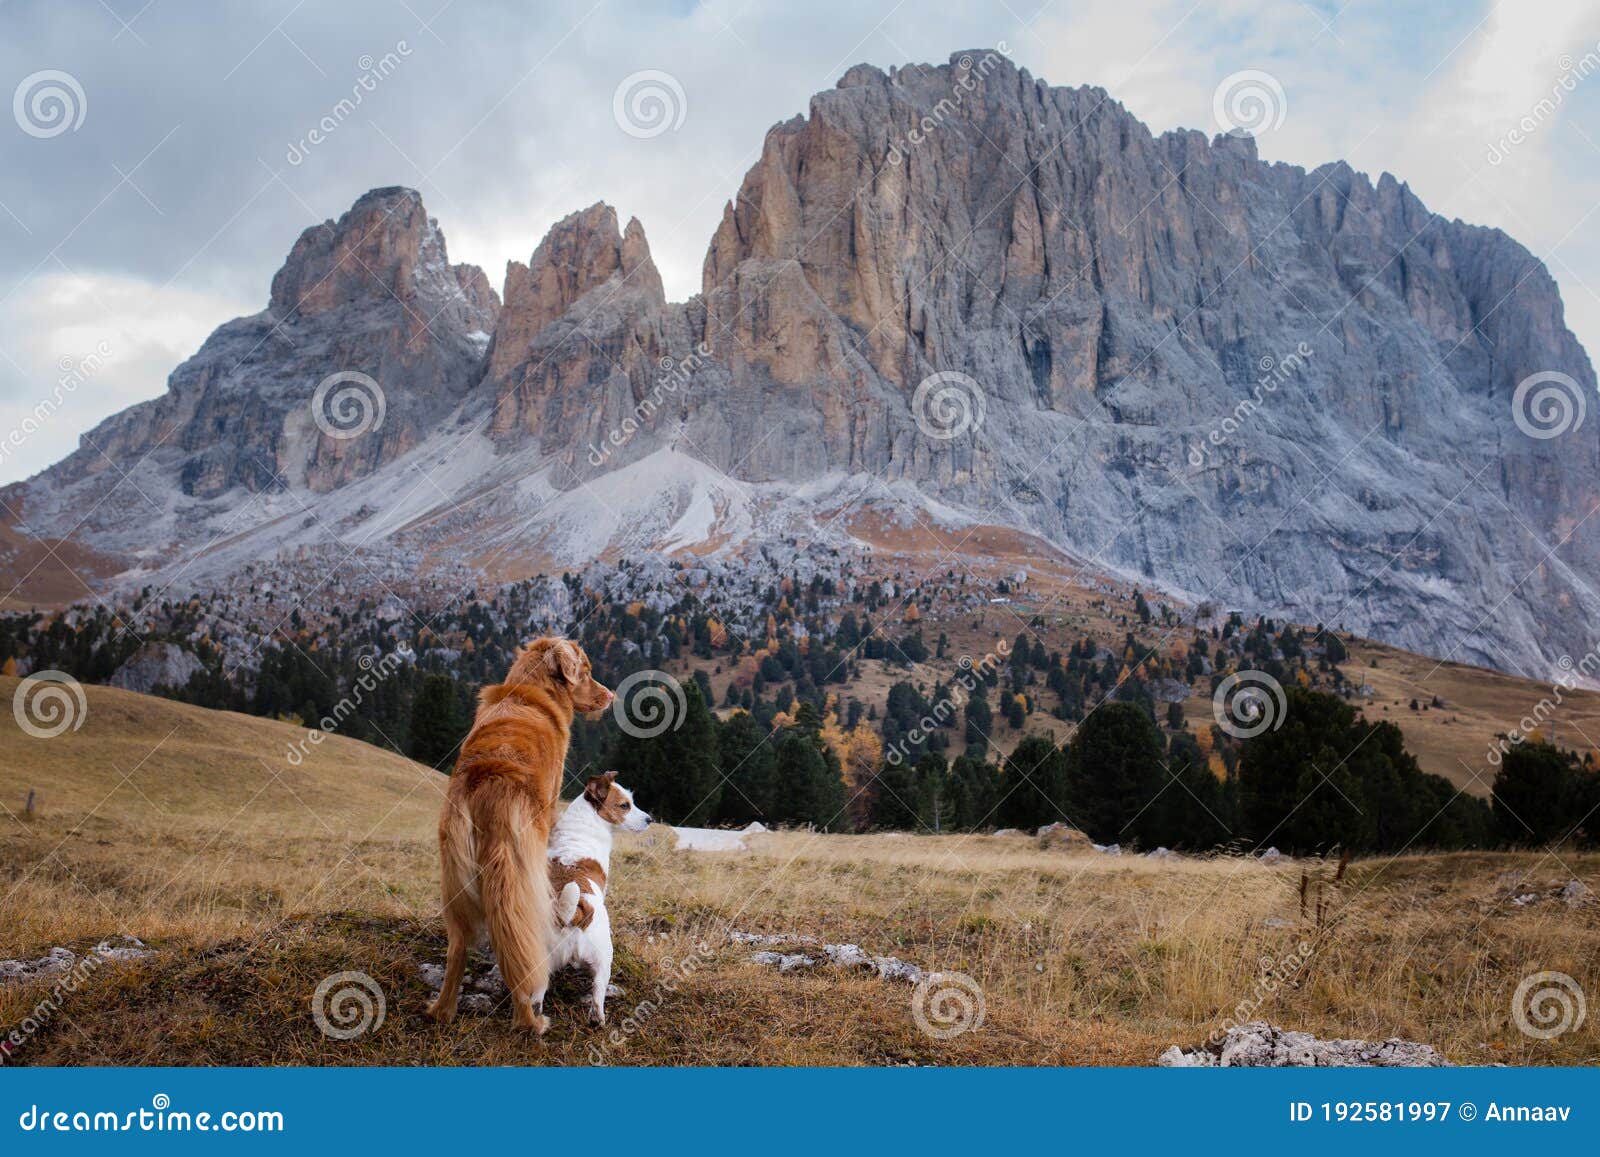 two dogs in travel. autumn mountain view. landscape with a pet